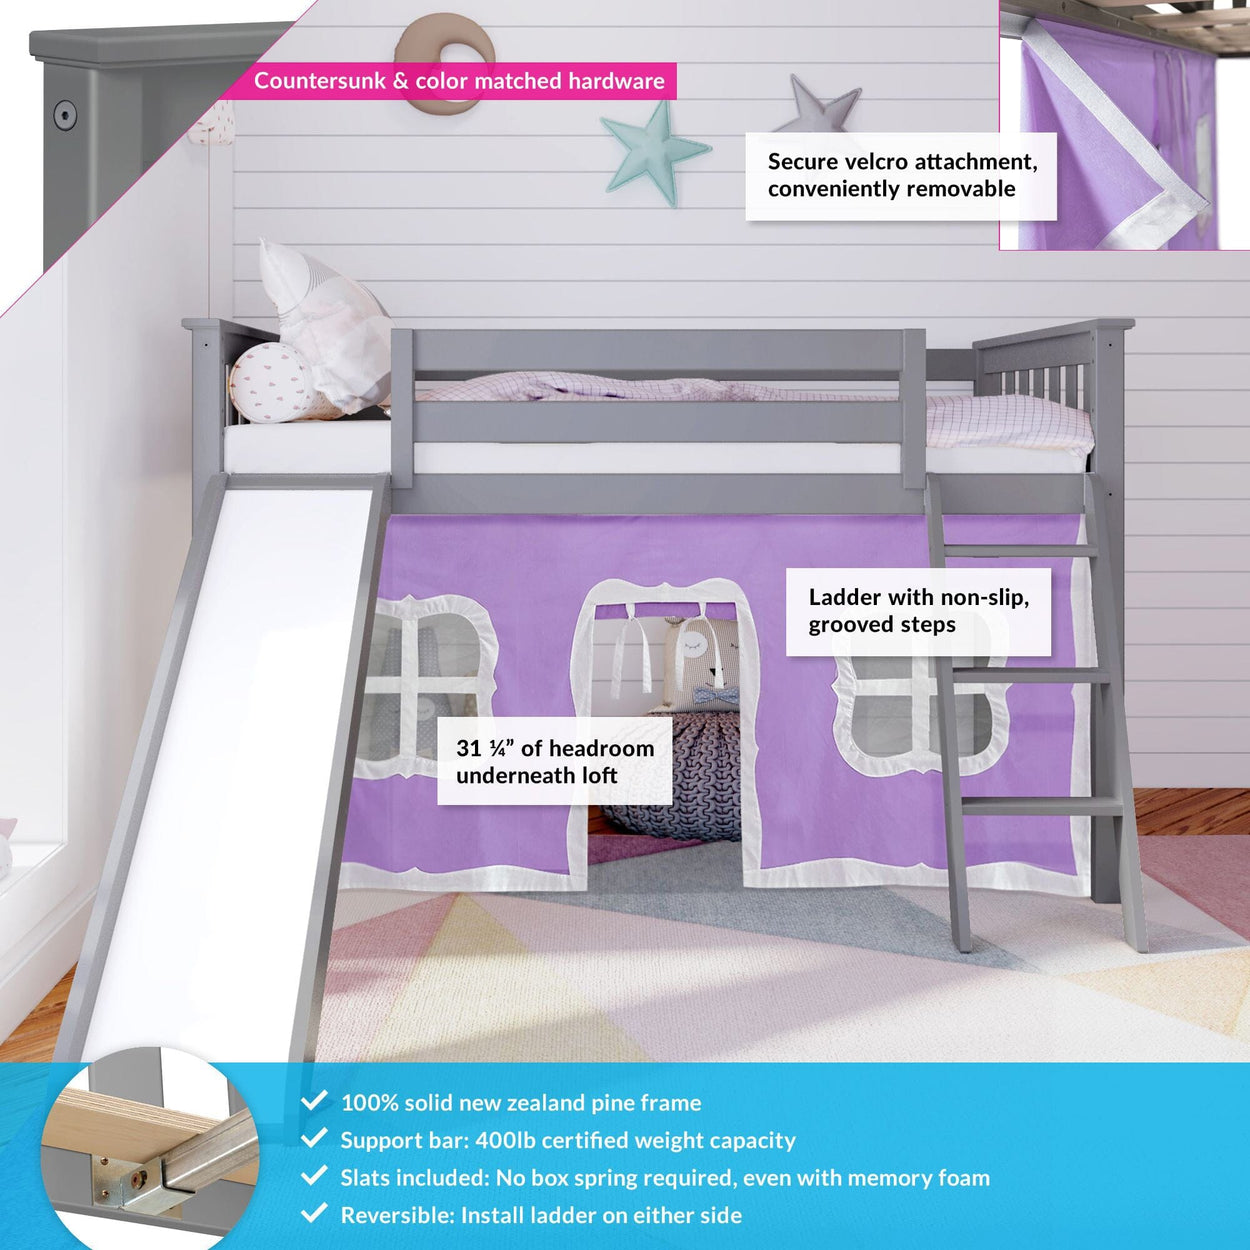 180213121061 : Loft Beds Twin-Size Low Loft with Slide with Curtain, Grey + Purple Curtain